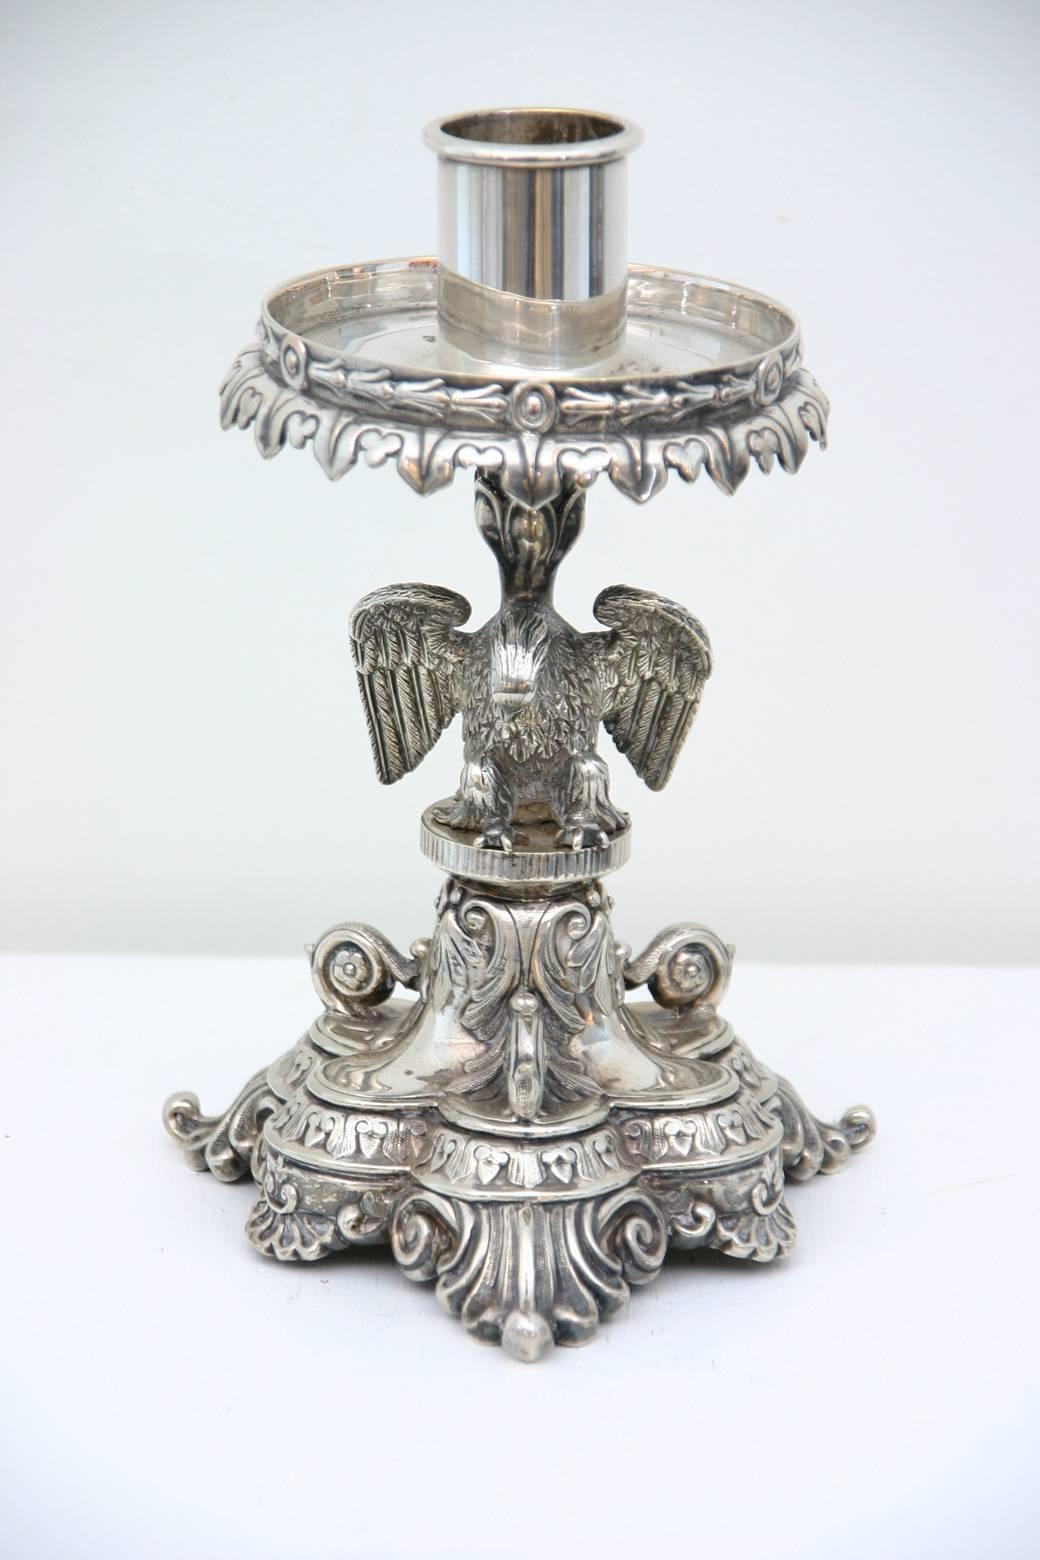 A 19th century English, Sheffield silver plated candle stand decorated with an eagle above a shell and acanthus leaf base.